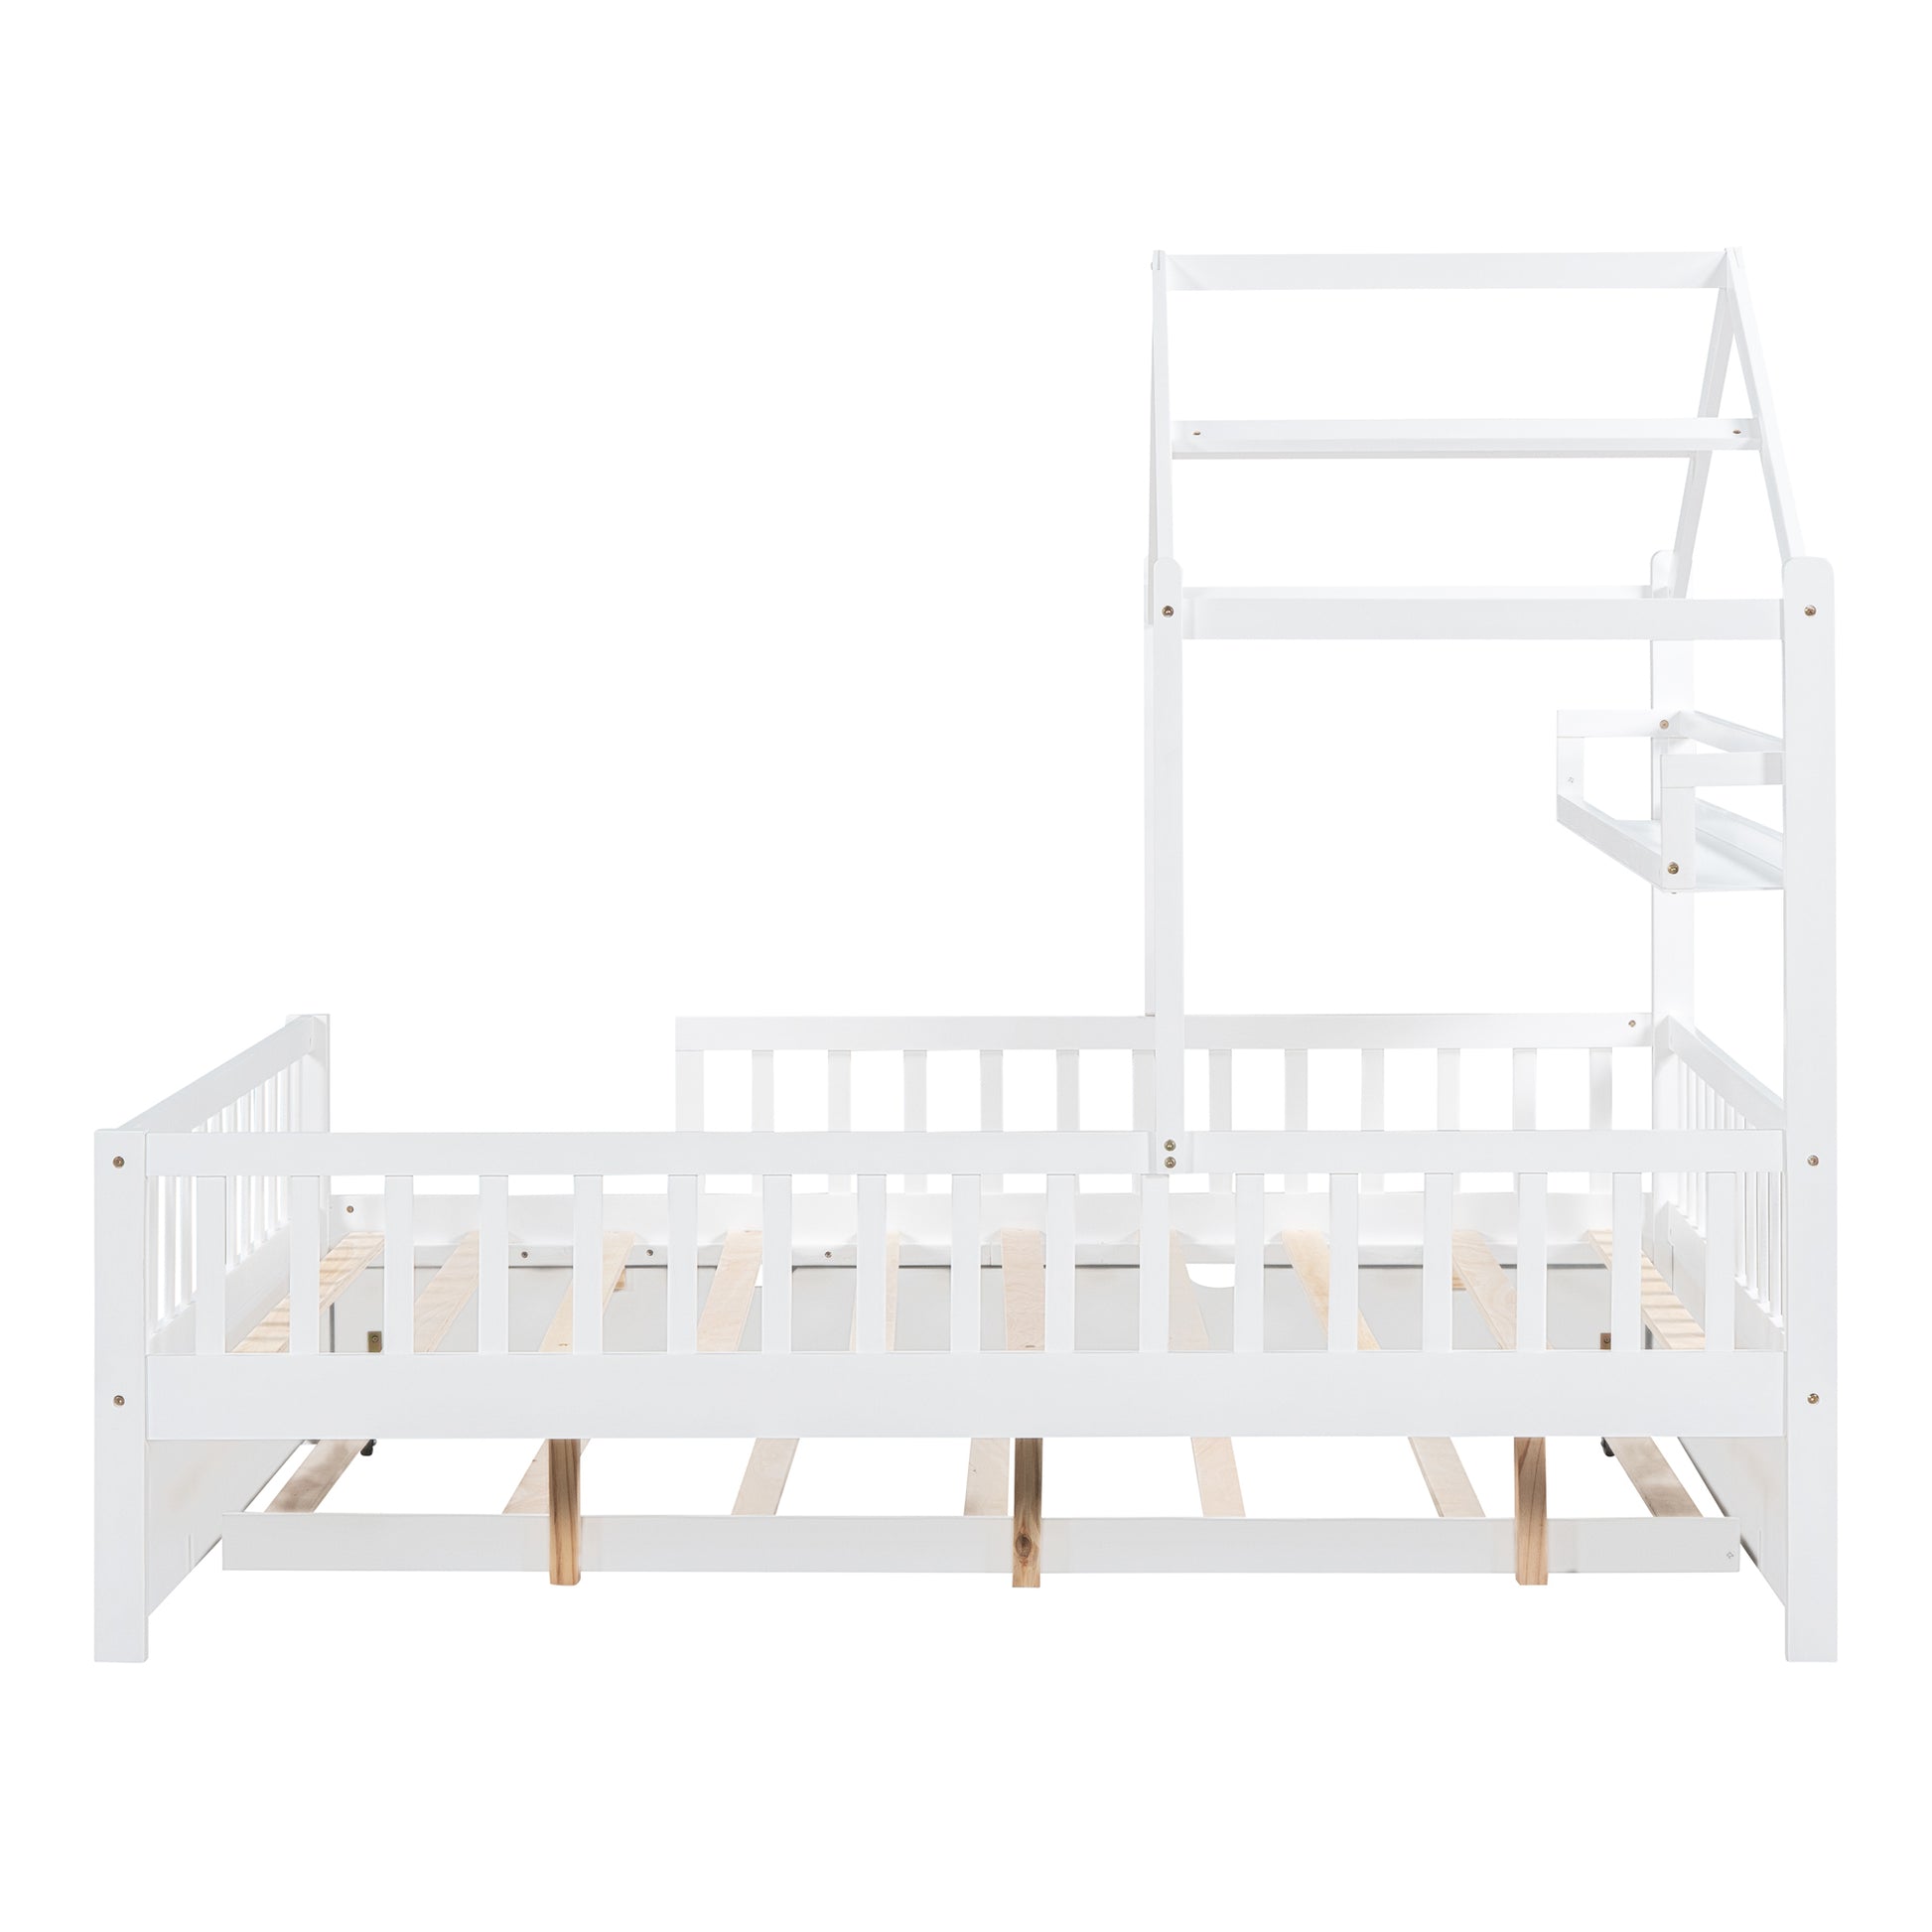 Wooden Full Size House Bed With Twin Size